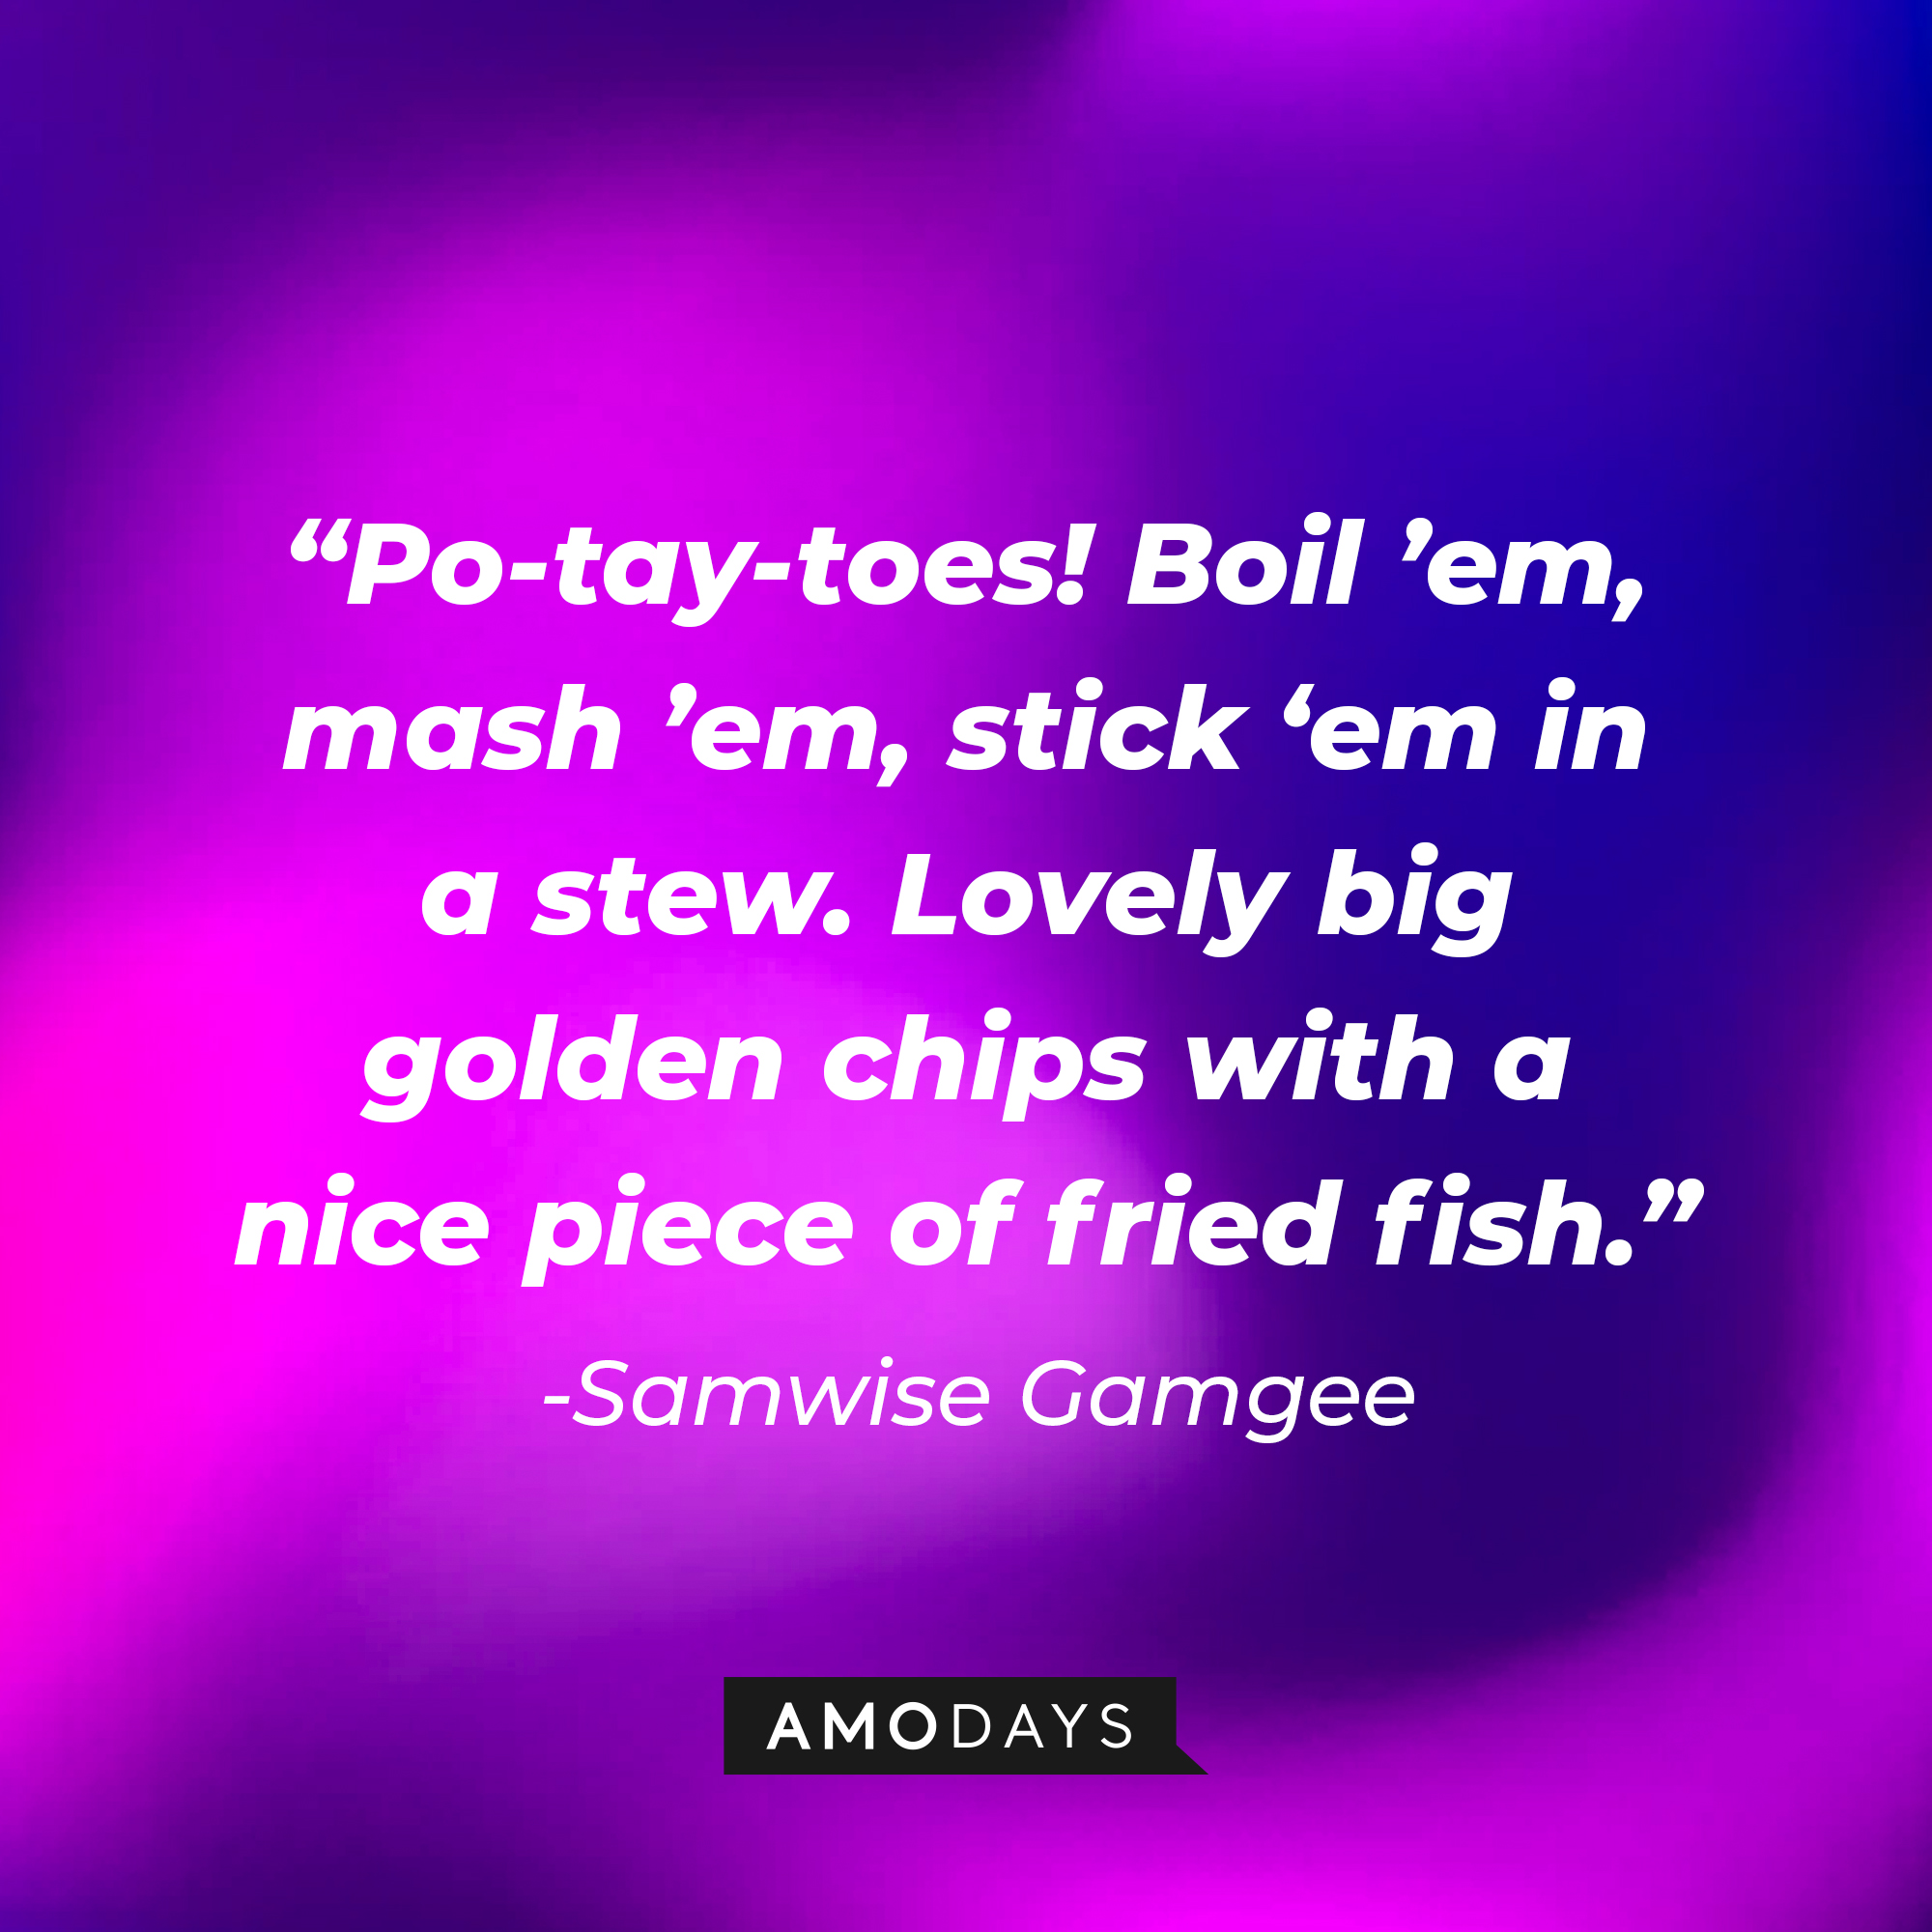 Samwise Gamgee's quote: “Po-tay-toes! Boil ’em, mash ’em, stick ‘em in a stew. Lovely big golden chips with a nice piece of fried fish.” | Source: Amodays